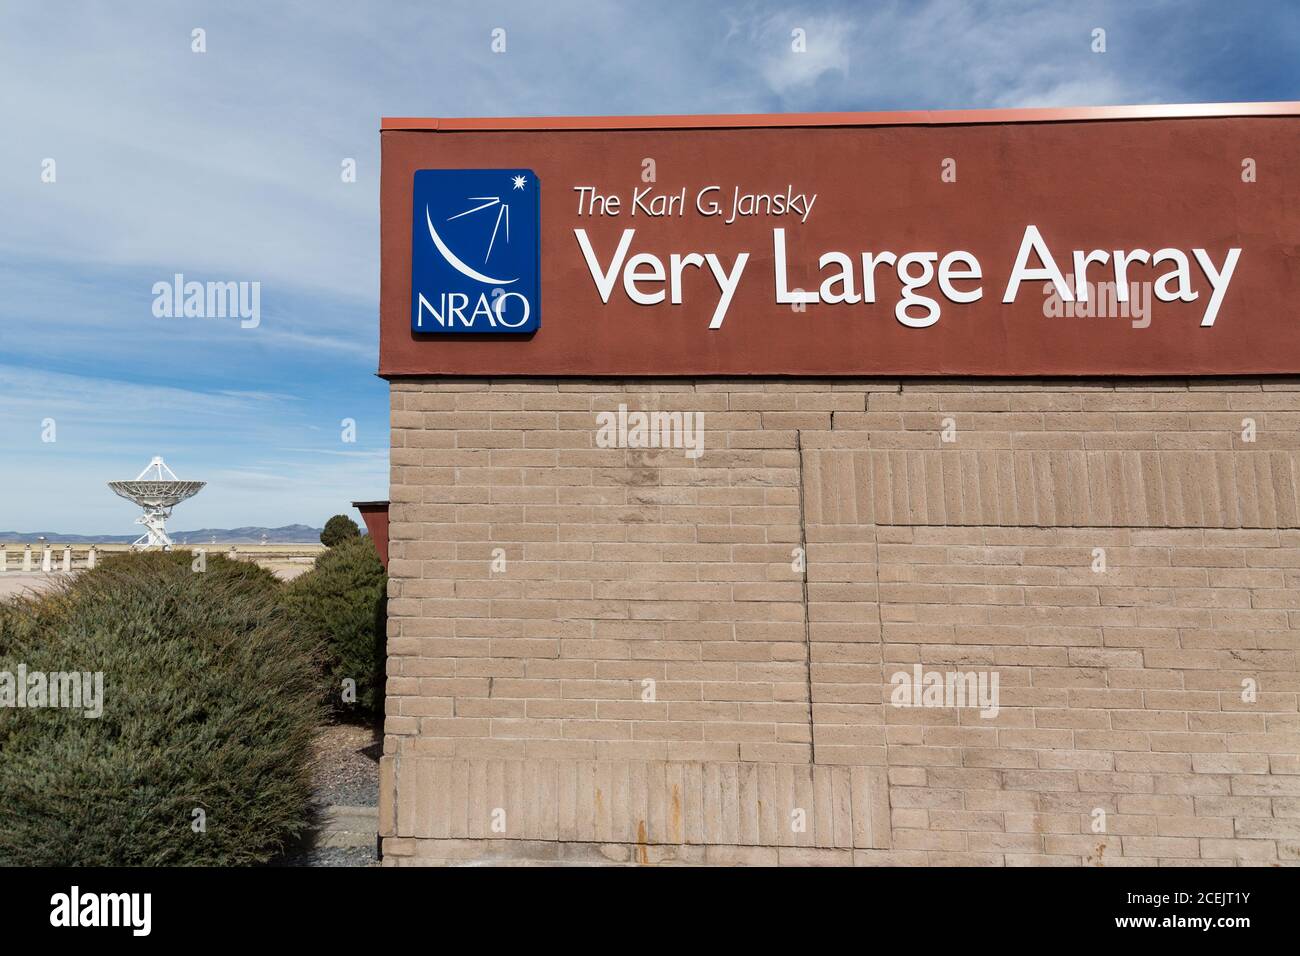 Visitor center and antenna dishes of the Karl G. Jansky Very Large Array radiotelescope astronomy observatory near Magdalena, New Mexico in the United Stock Photo